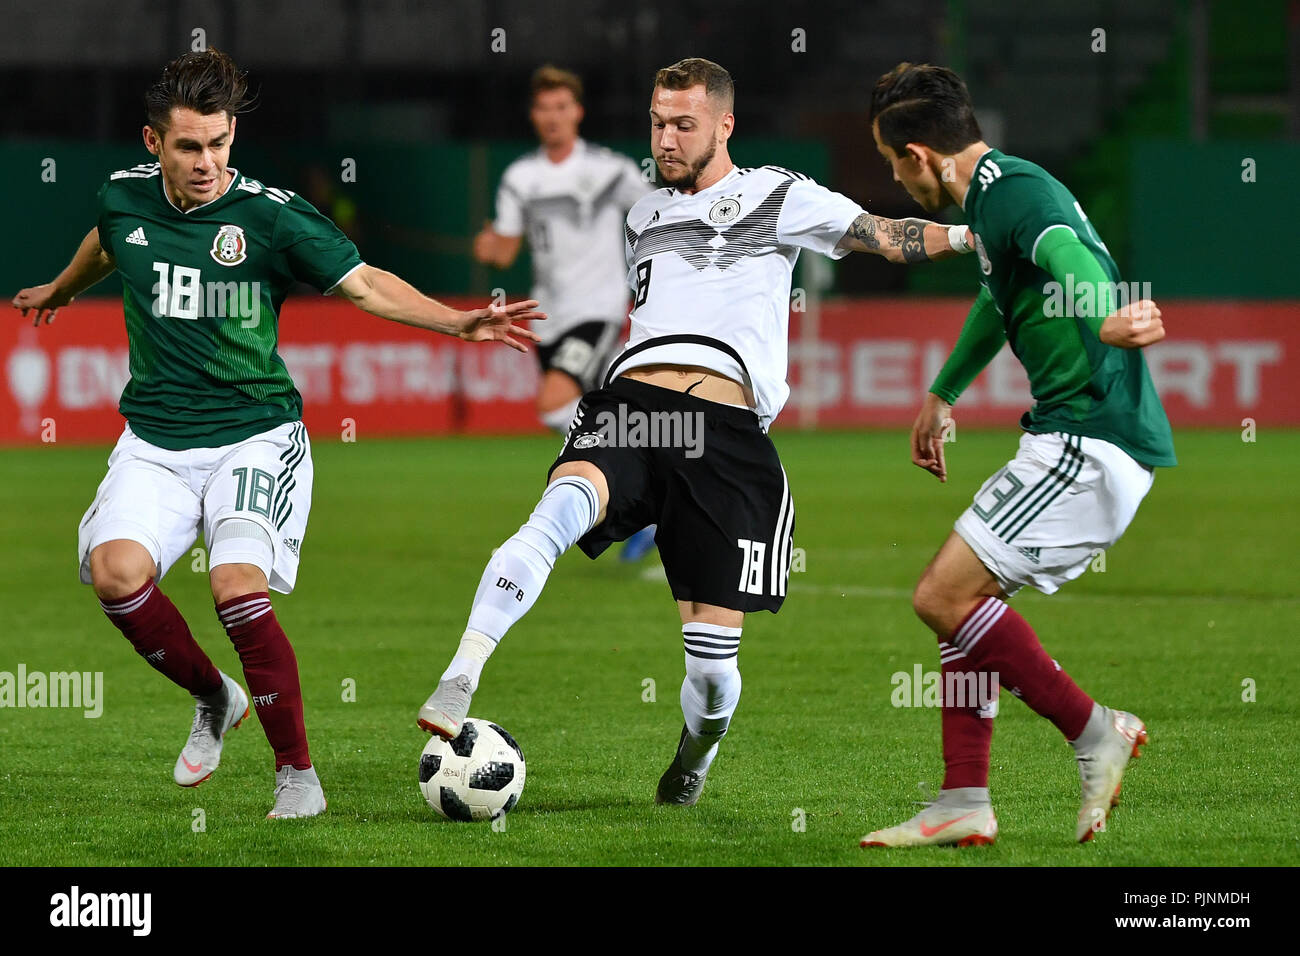 Marcel HARTEL (GER), action, duels versus Ricardo ANGULO (MEX) and Alan MOZO (MEX). Football U-21 Laender game. Germany (GER) - Mexico (MEX) 3-0, on 07.09.2018 in Fuerth, Sportpark Ronhof/Thomas Sommer. DFB REGULATIONS PROHIBIT ANY USE OF PHOTOGRAPH AS IMAGE SEQUENCES AND/OR QUASI VIDEO. | usage worldwide Stock Photo